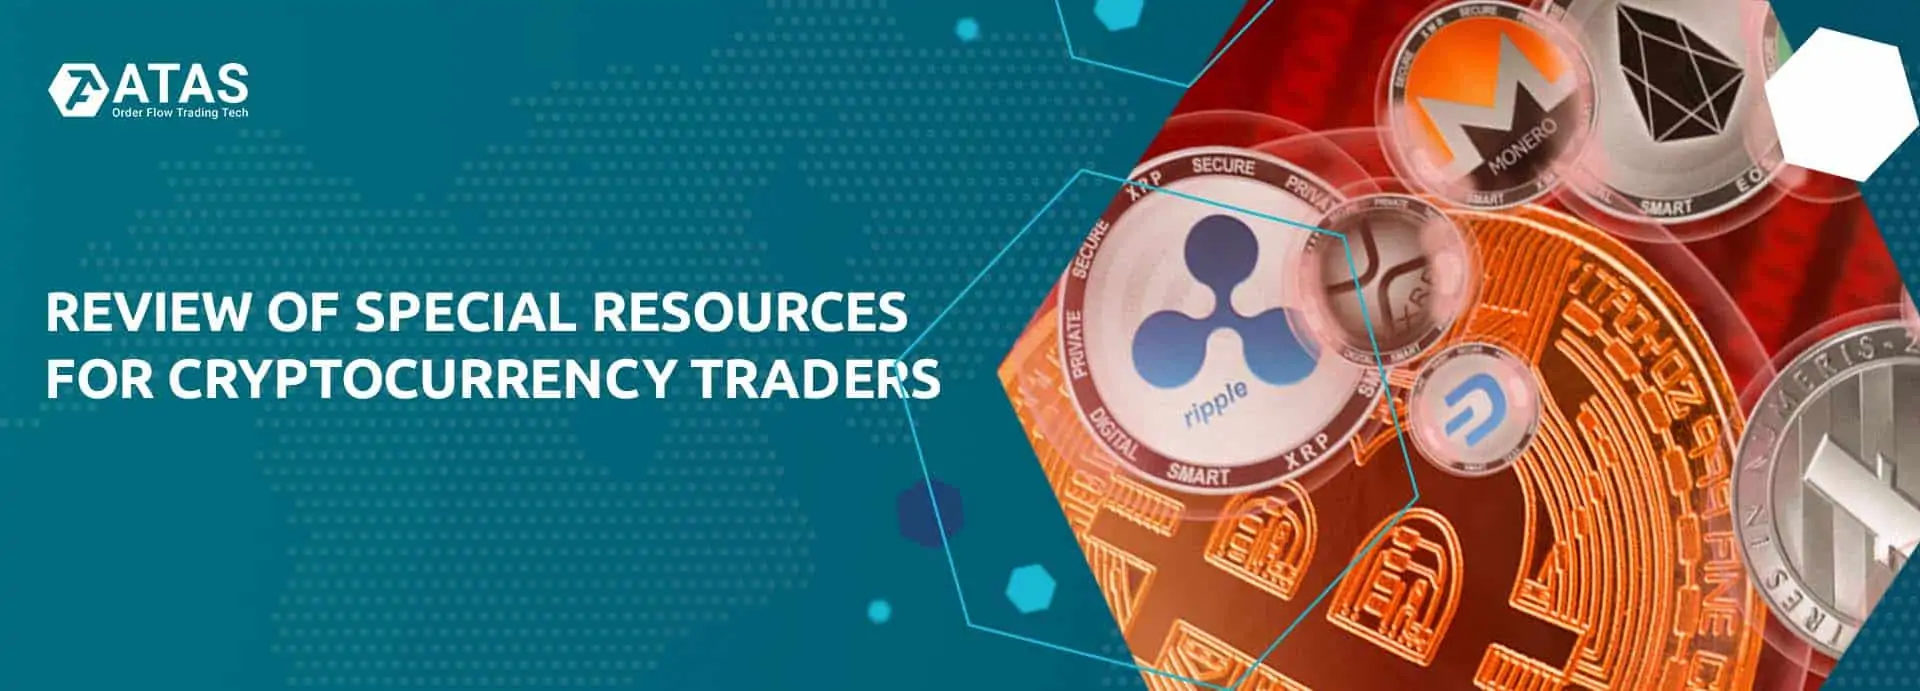 Review of special resources for cryptocurrency traders